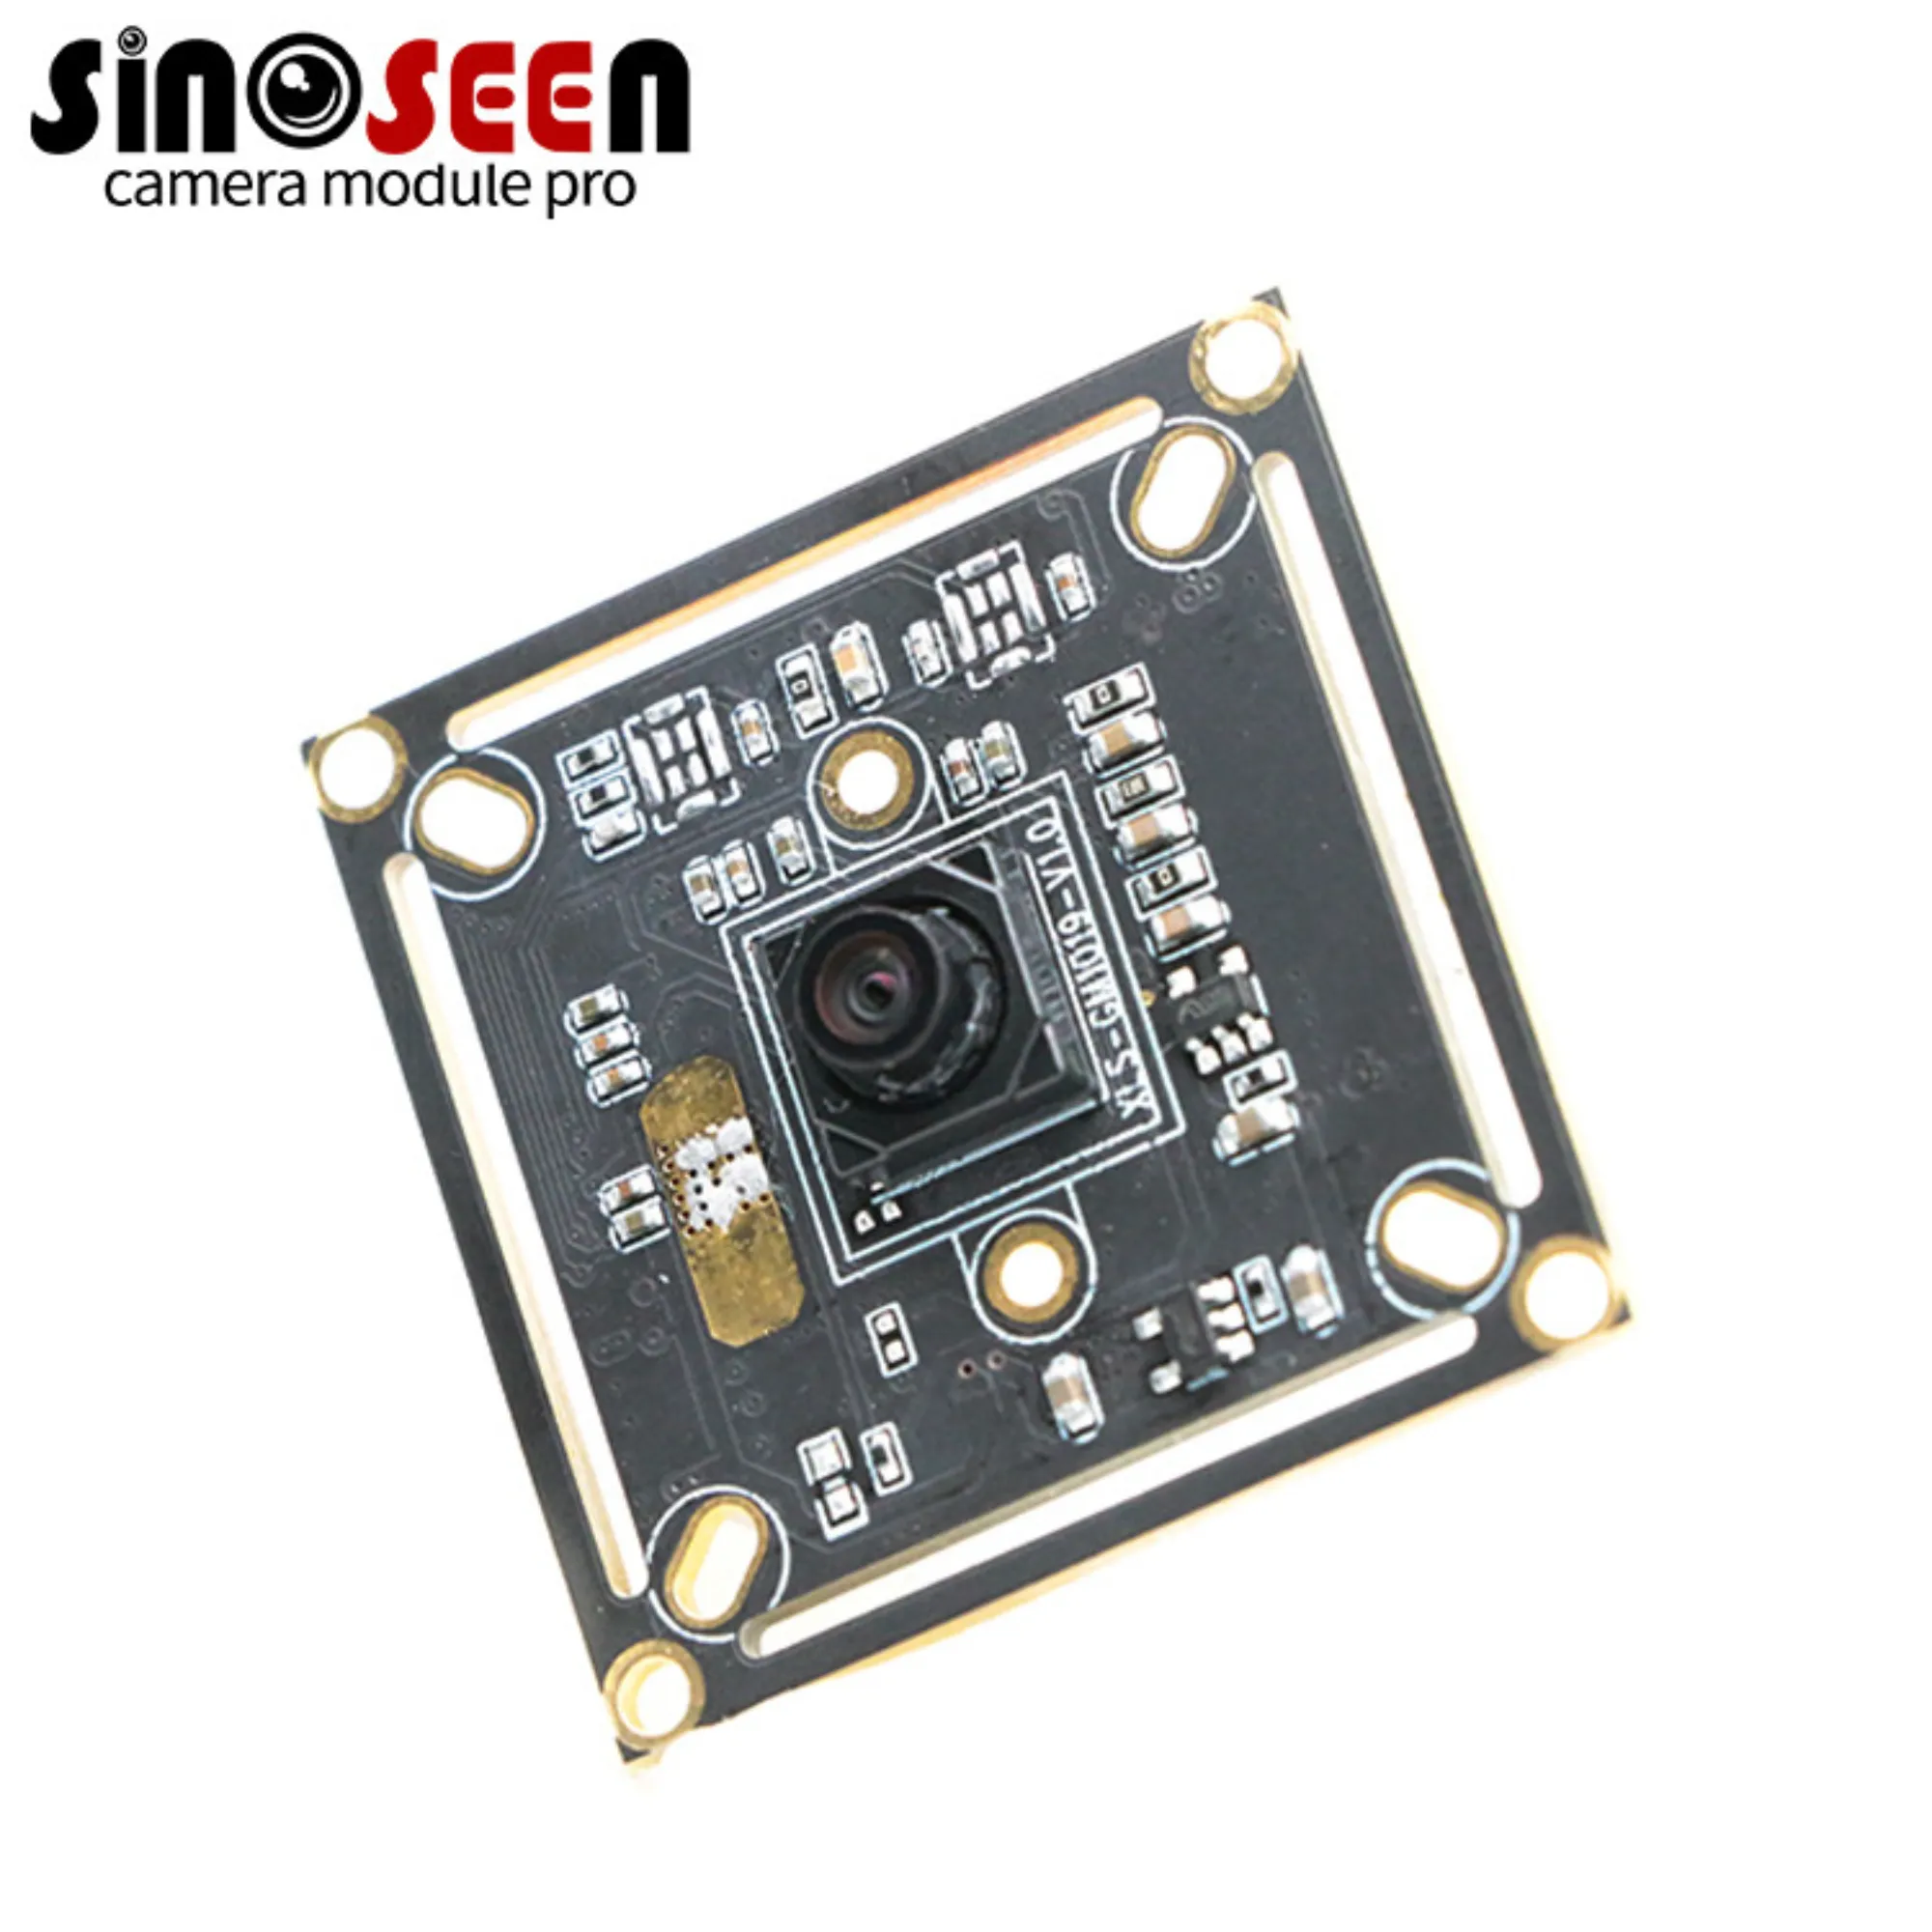 Versatile 20MP USB Camera Module with IMX230 Sensor for High Speed Scanning